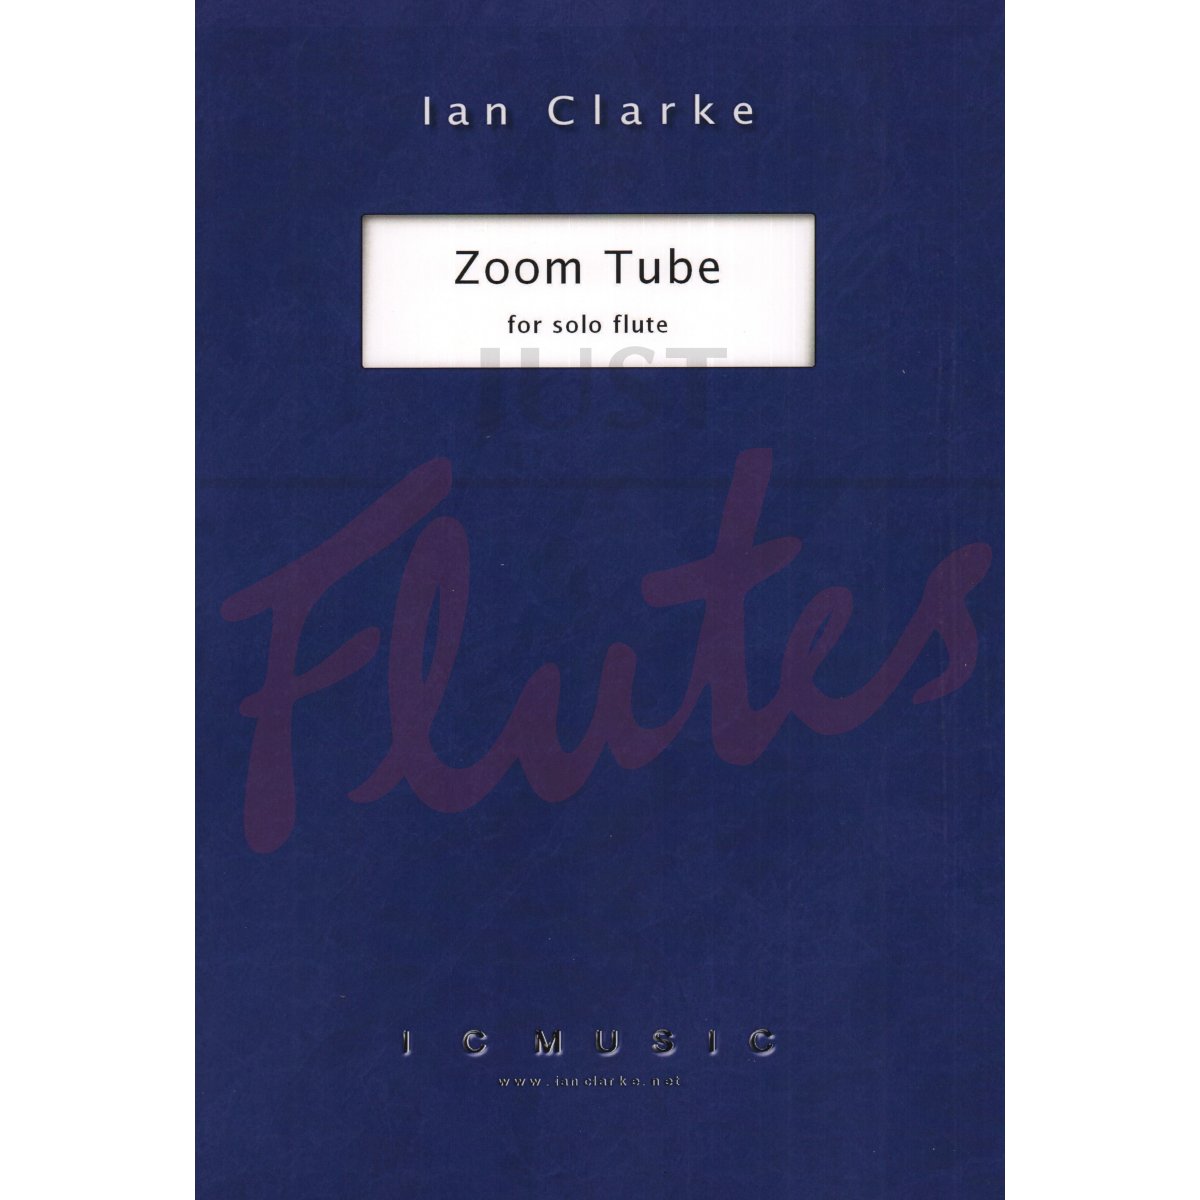 Zoom Tube for Solo Flute